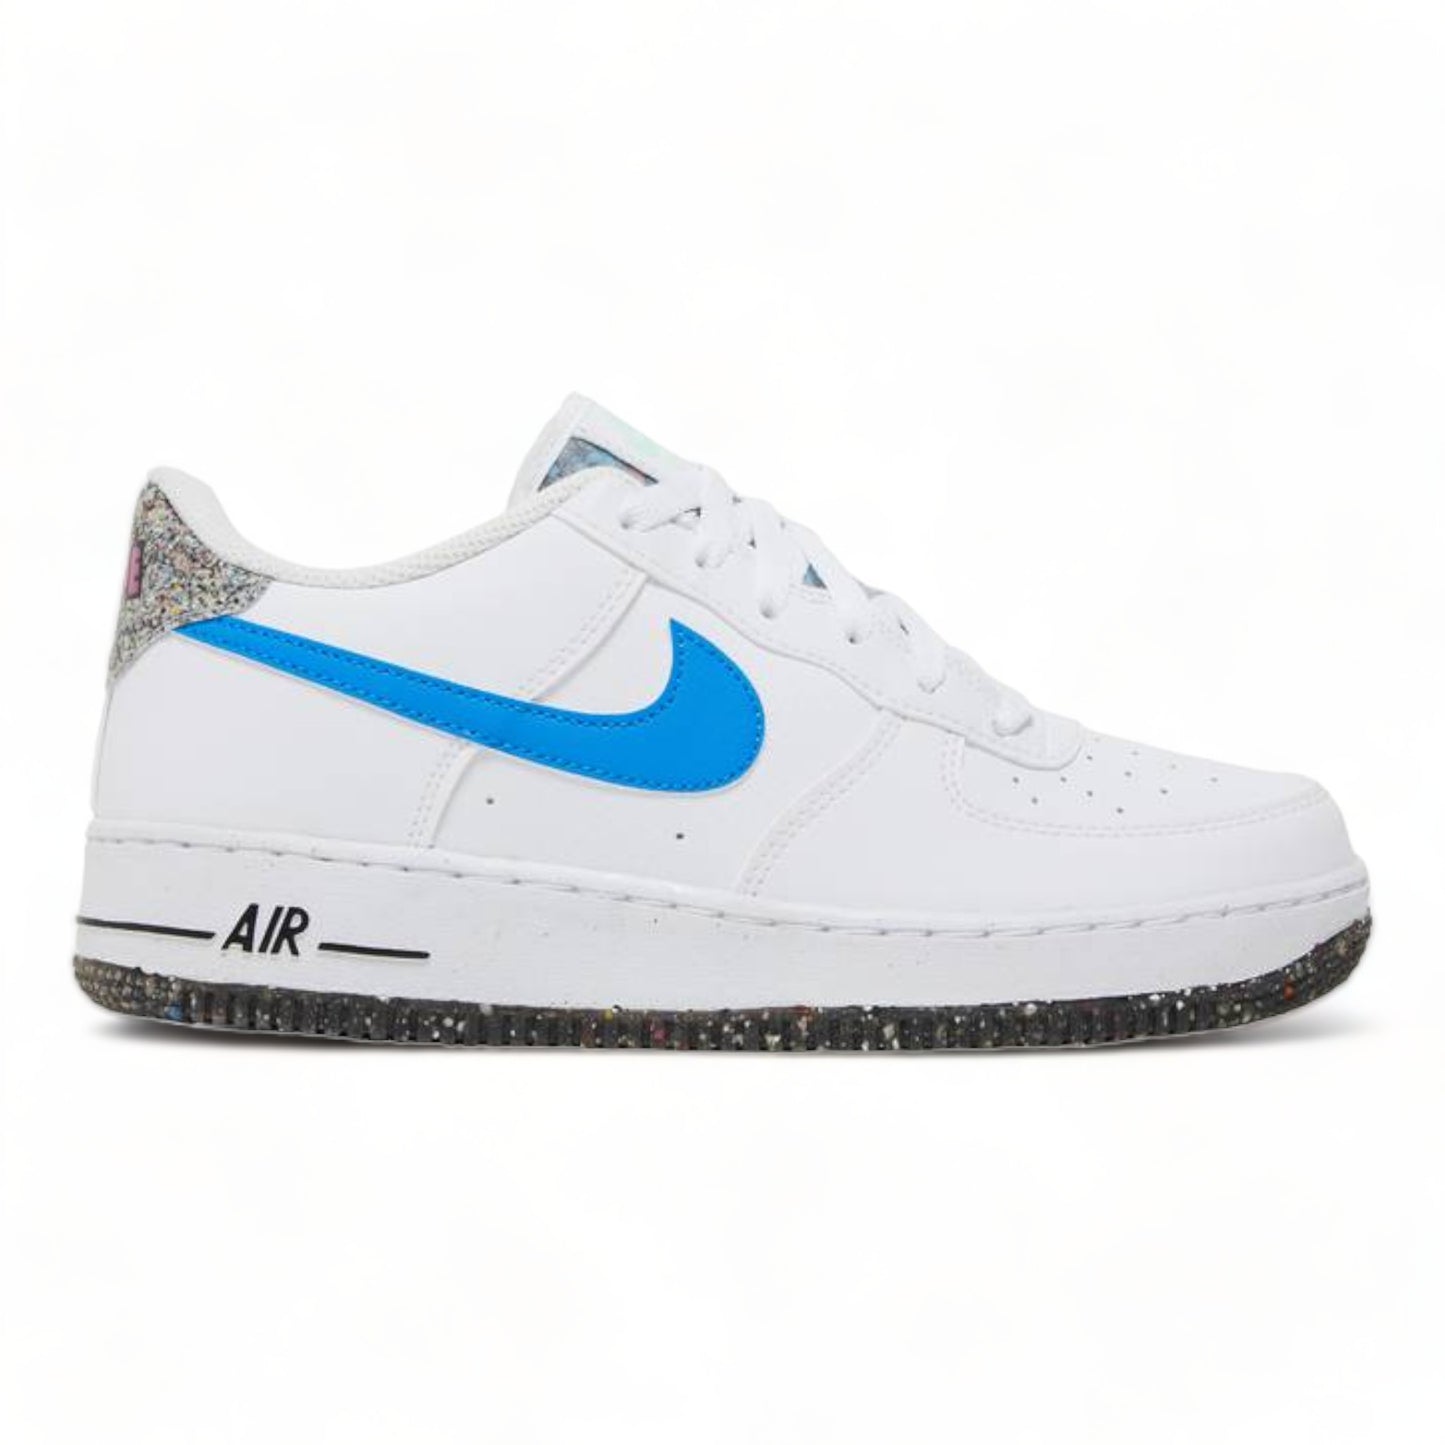 NIKE AIR FORCE 1 LV8 NEXT NATURE CRATER GS 'WHITE LIGHT PHOTO BLUE'